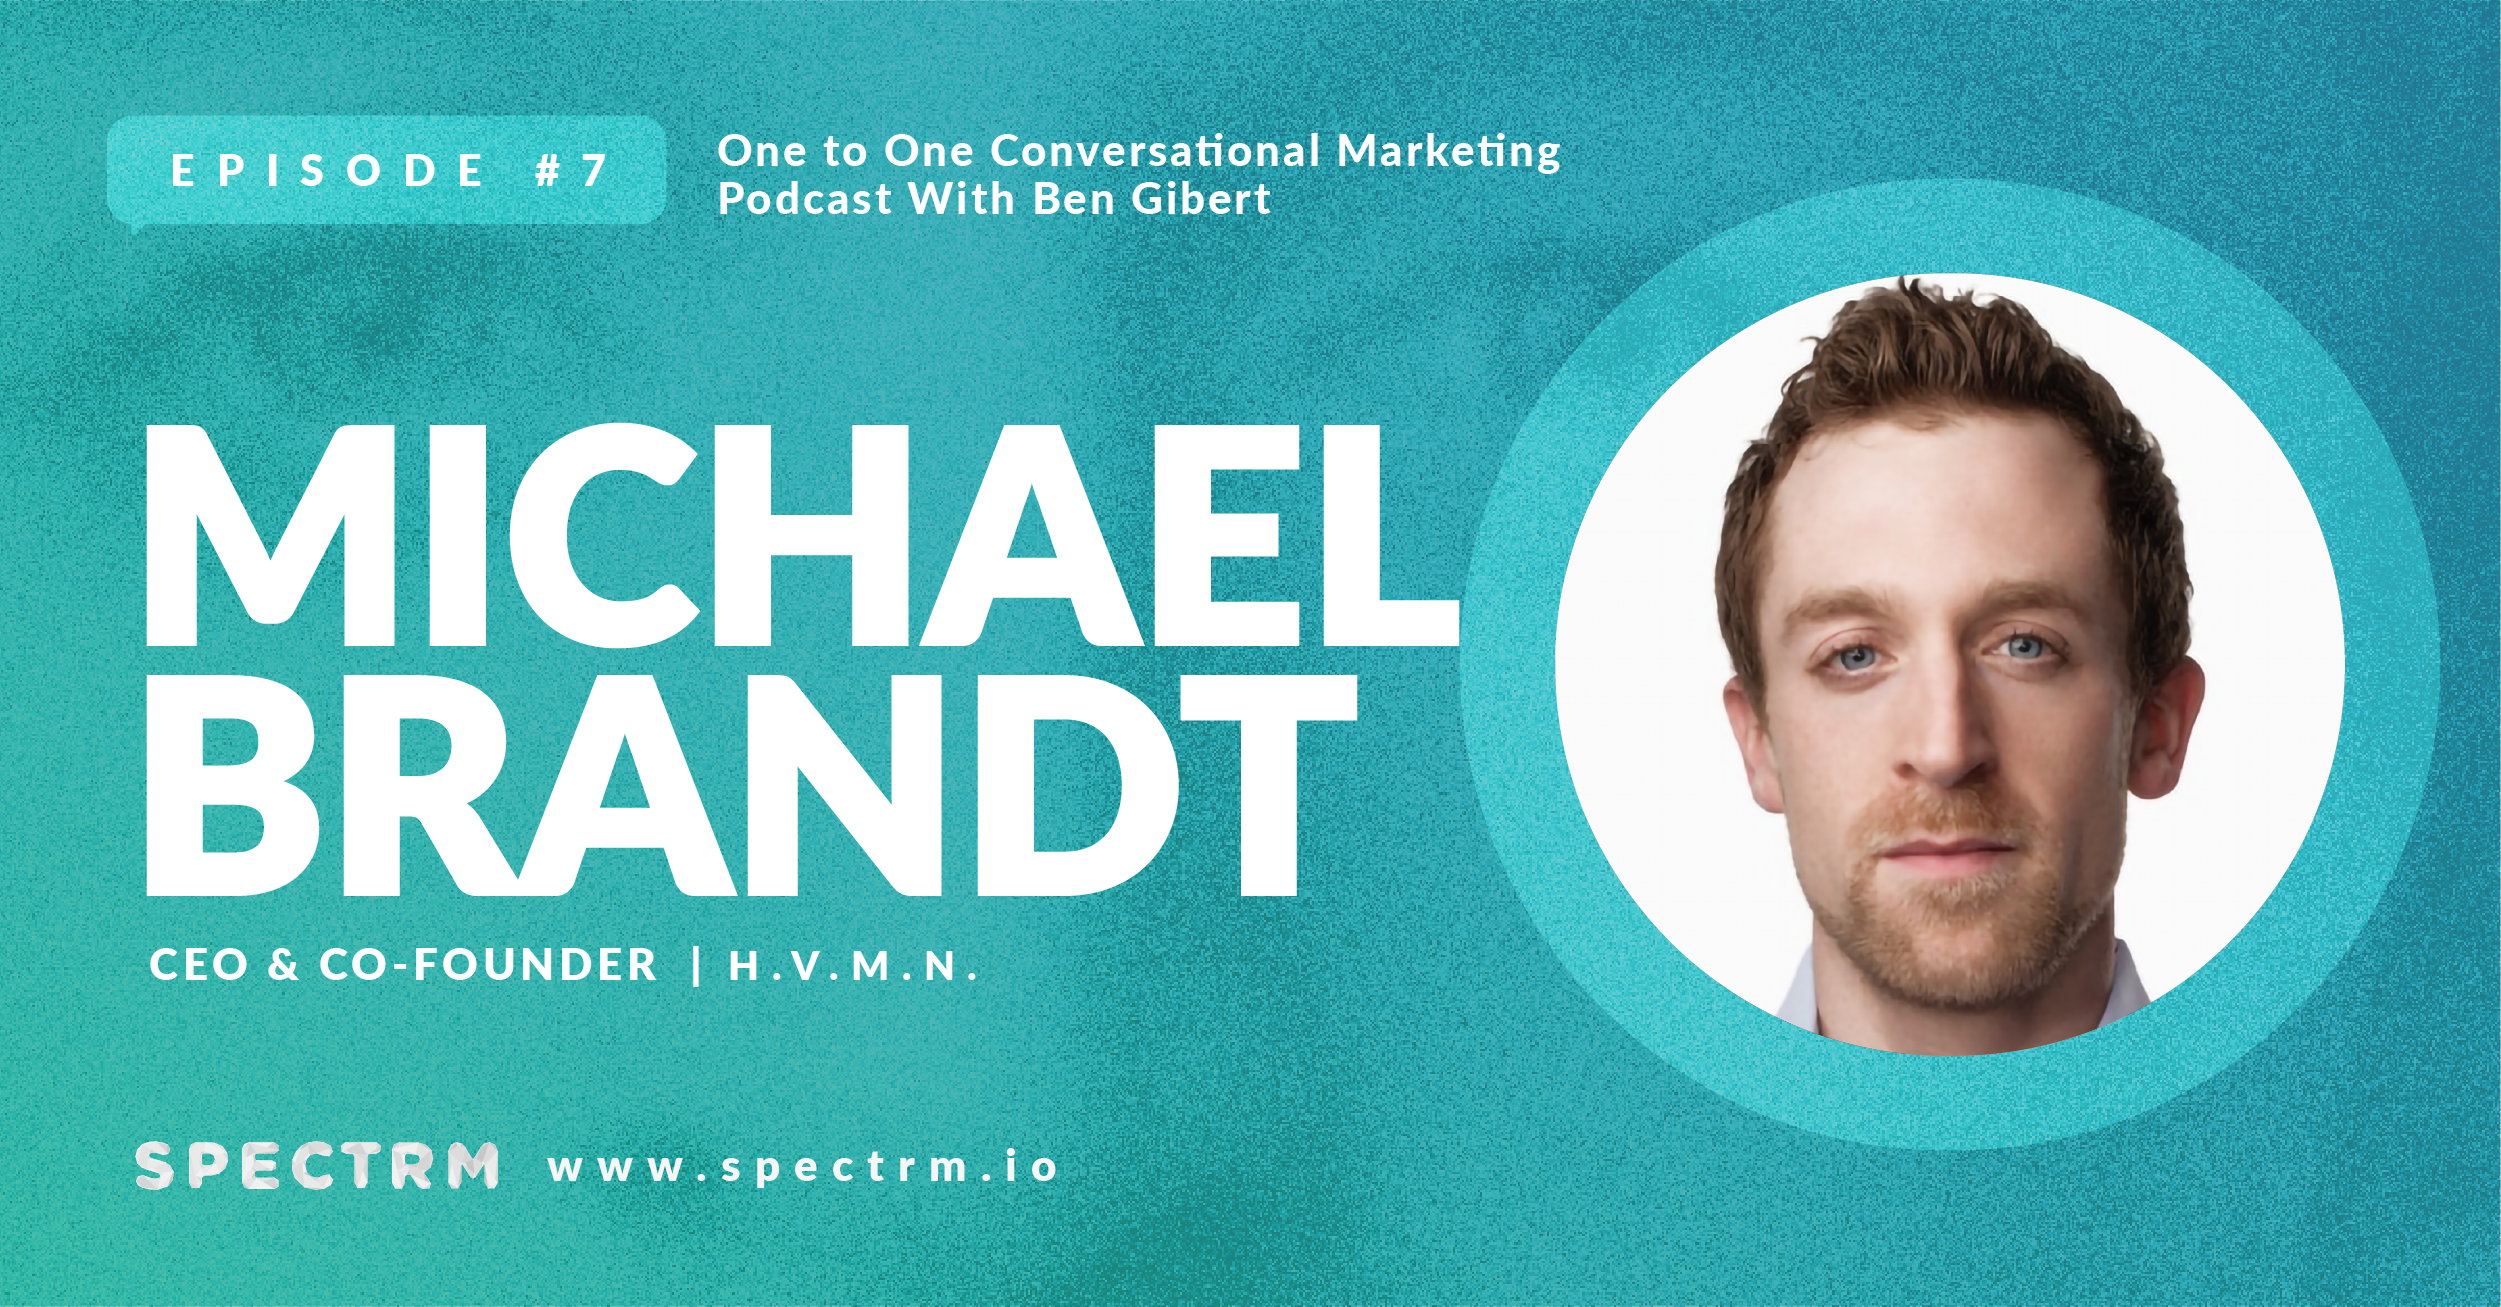 podcast episode with michael brandt reaching personalization at scale